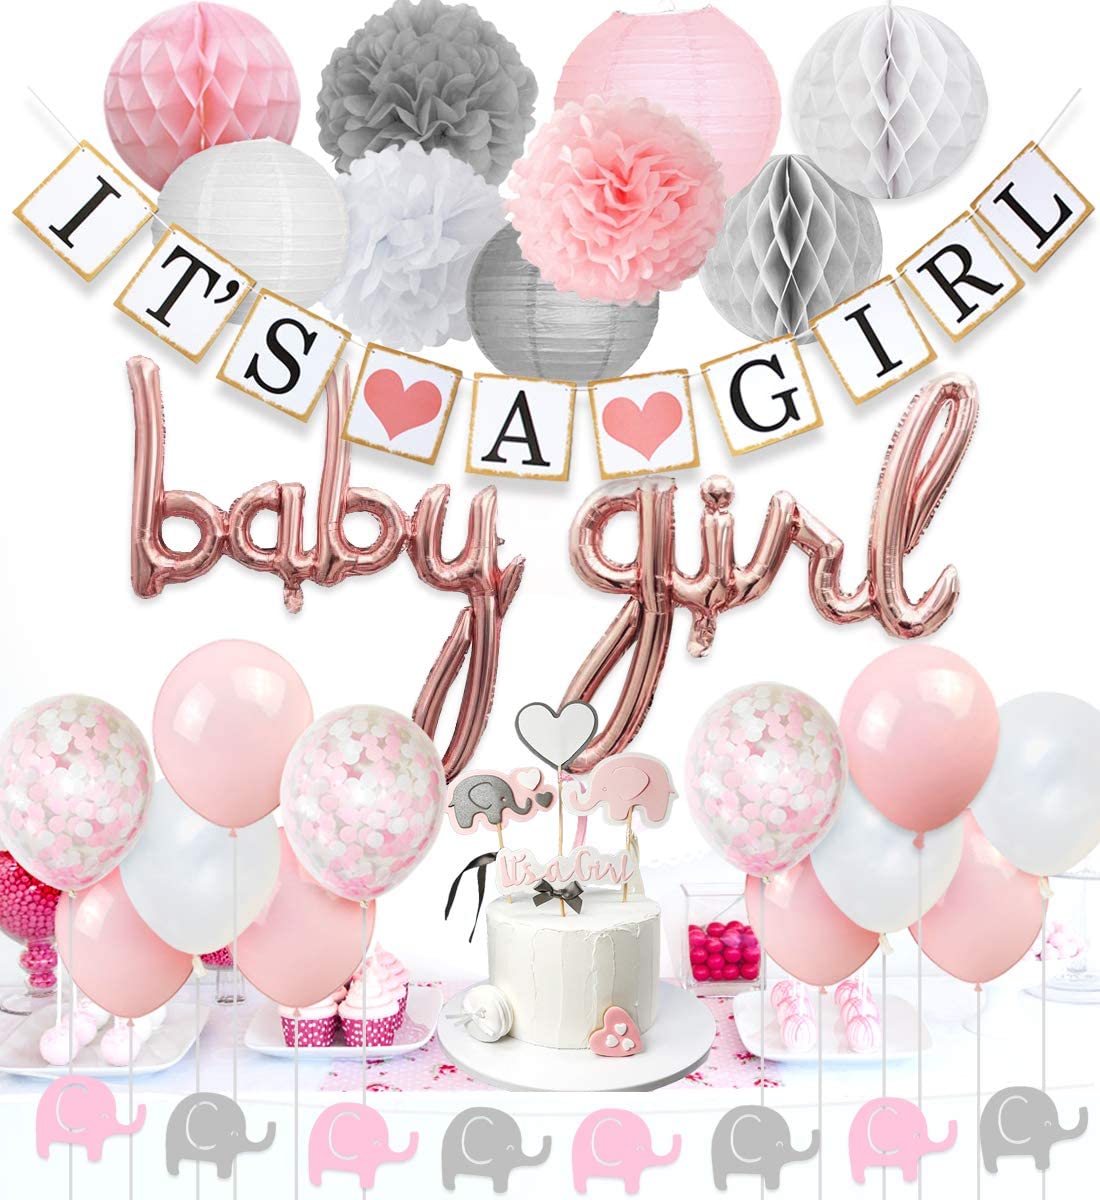 JOYMEMO Baby Shower Decorations for Girls Pink and White, Baby